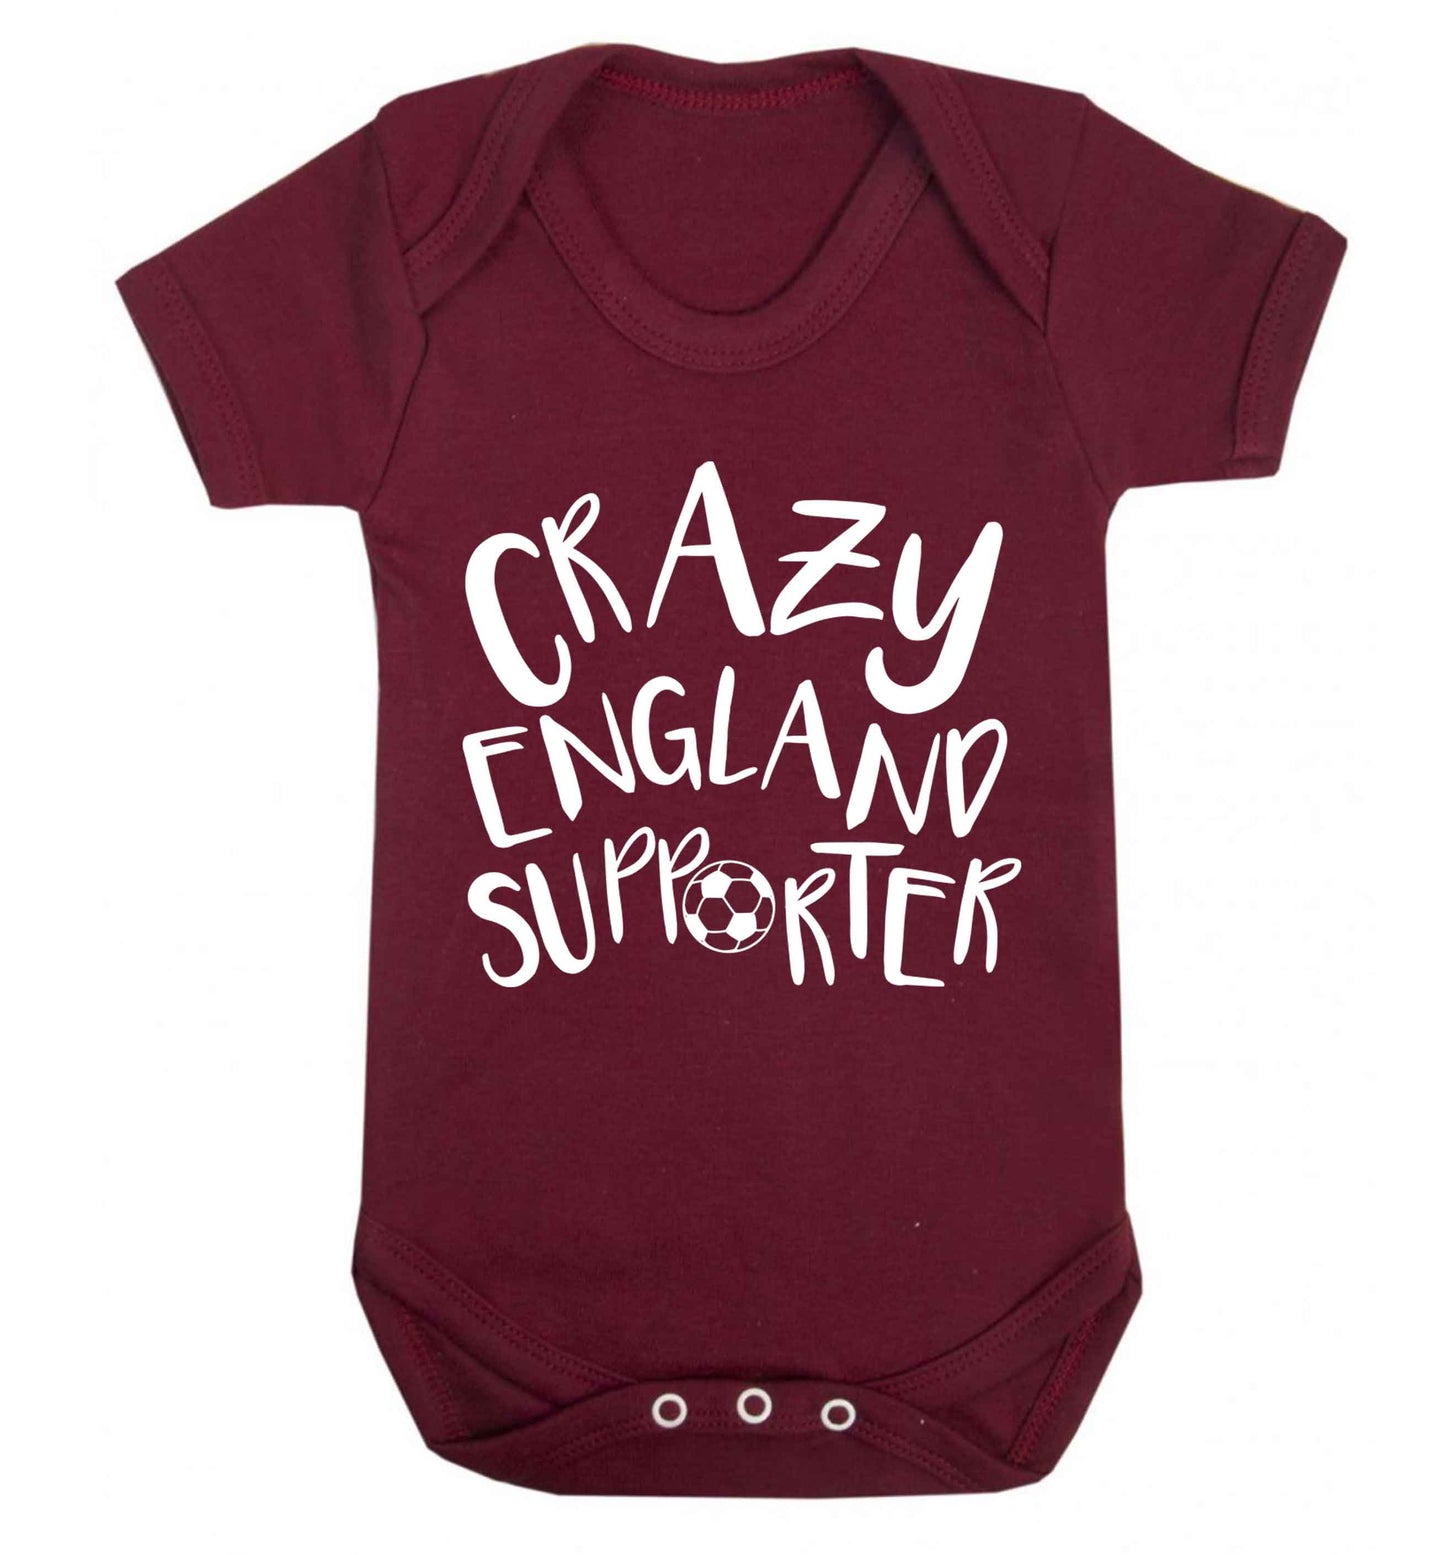 Crazy England supporter Baby Vest maroon 18-24 months